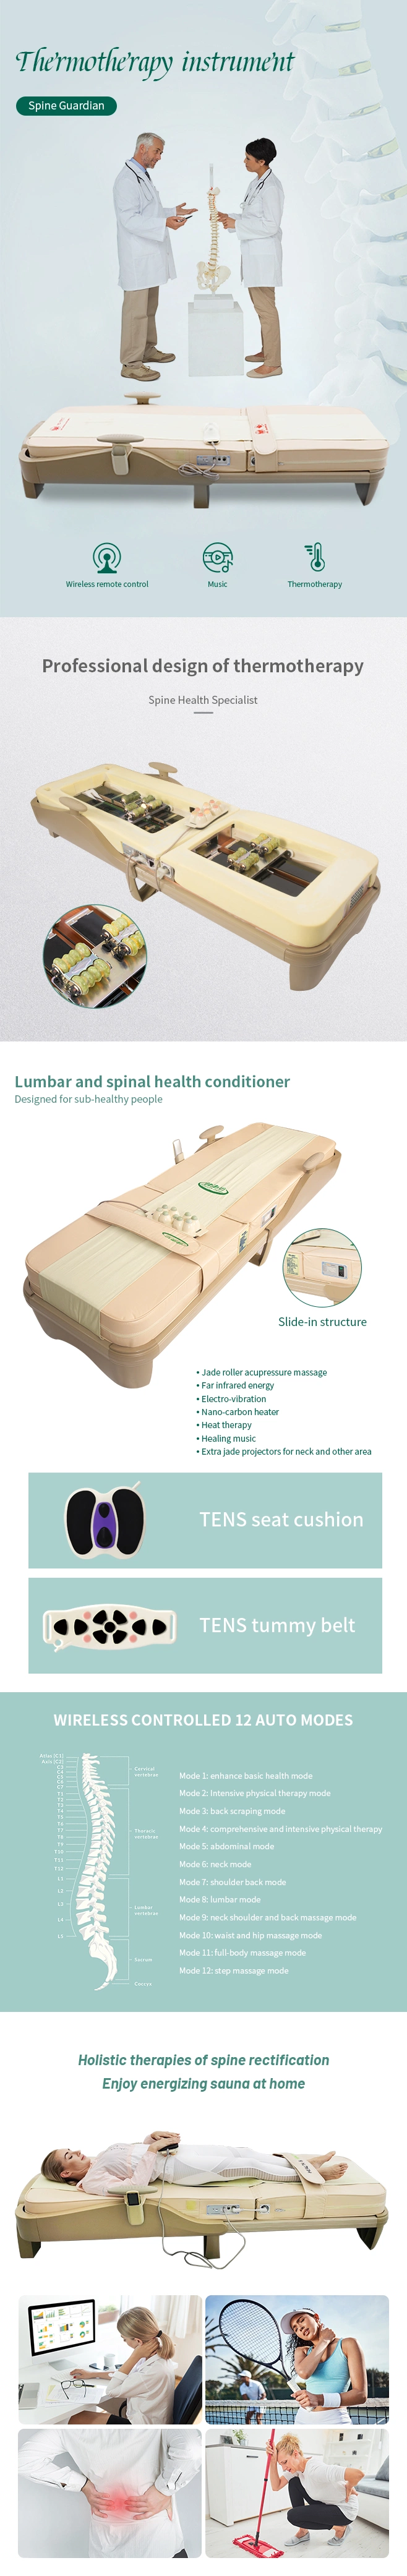 Wireless Auto Electrotherapy Physiotherapy Fir Jade Roller Spine Massage Bed for Home Use